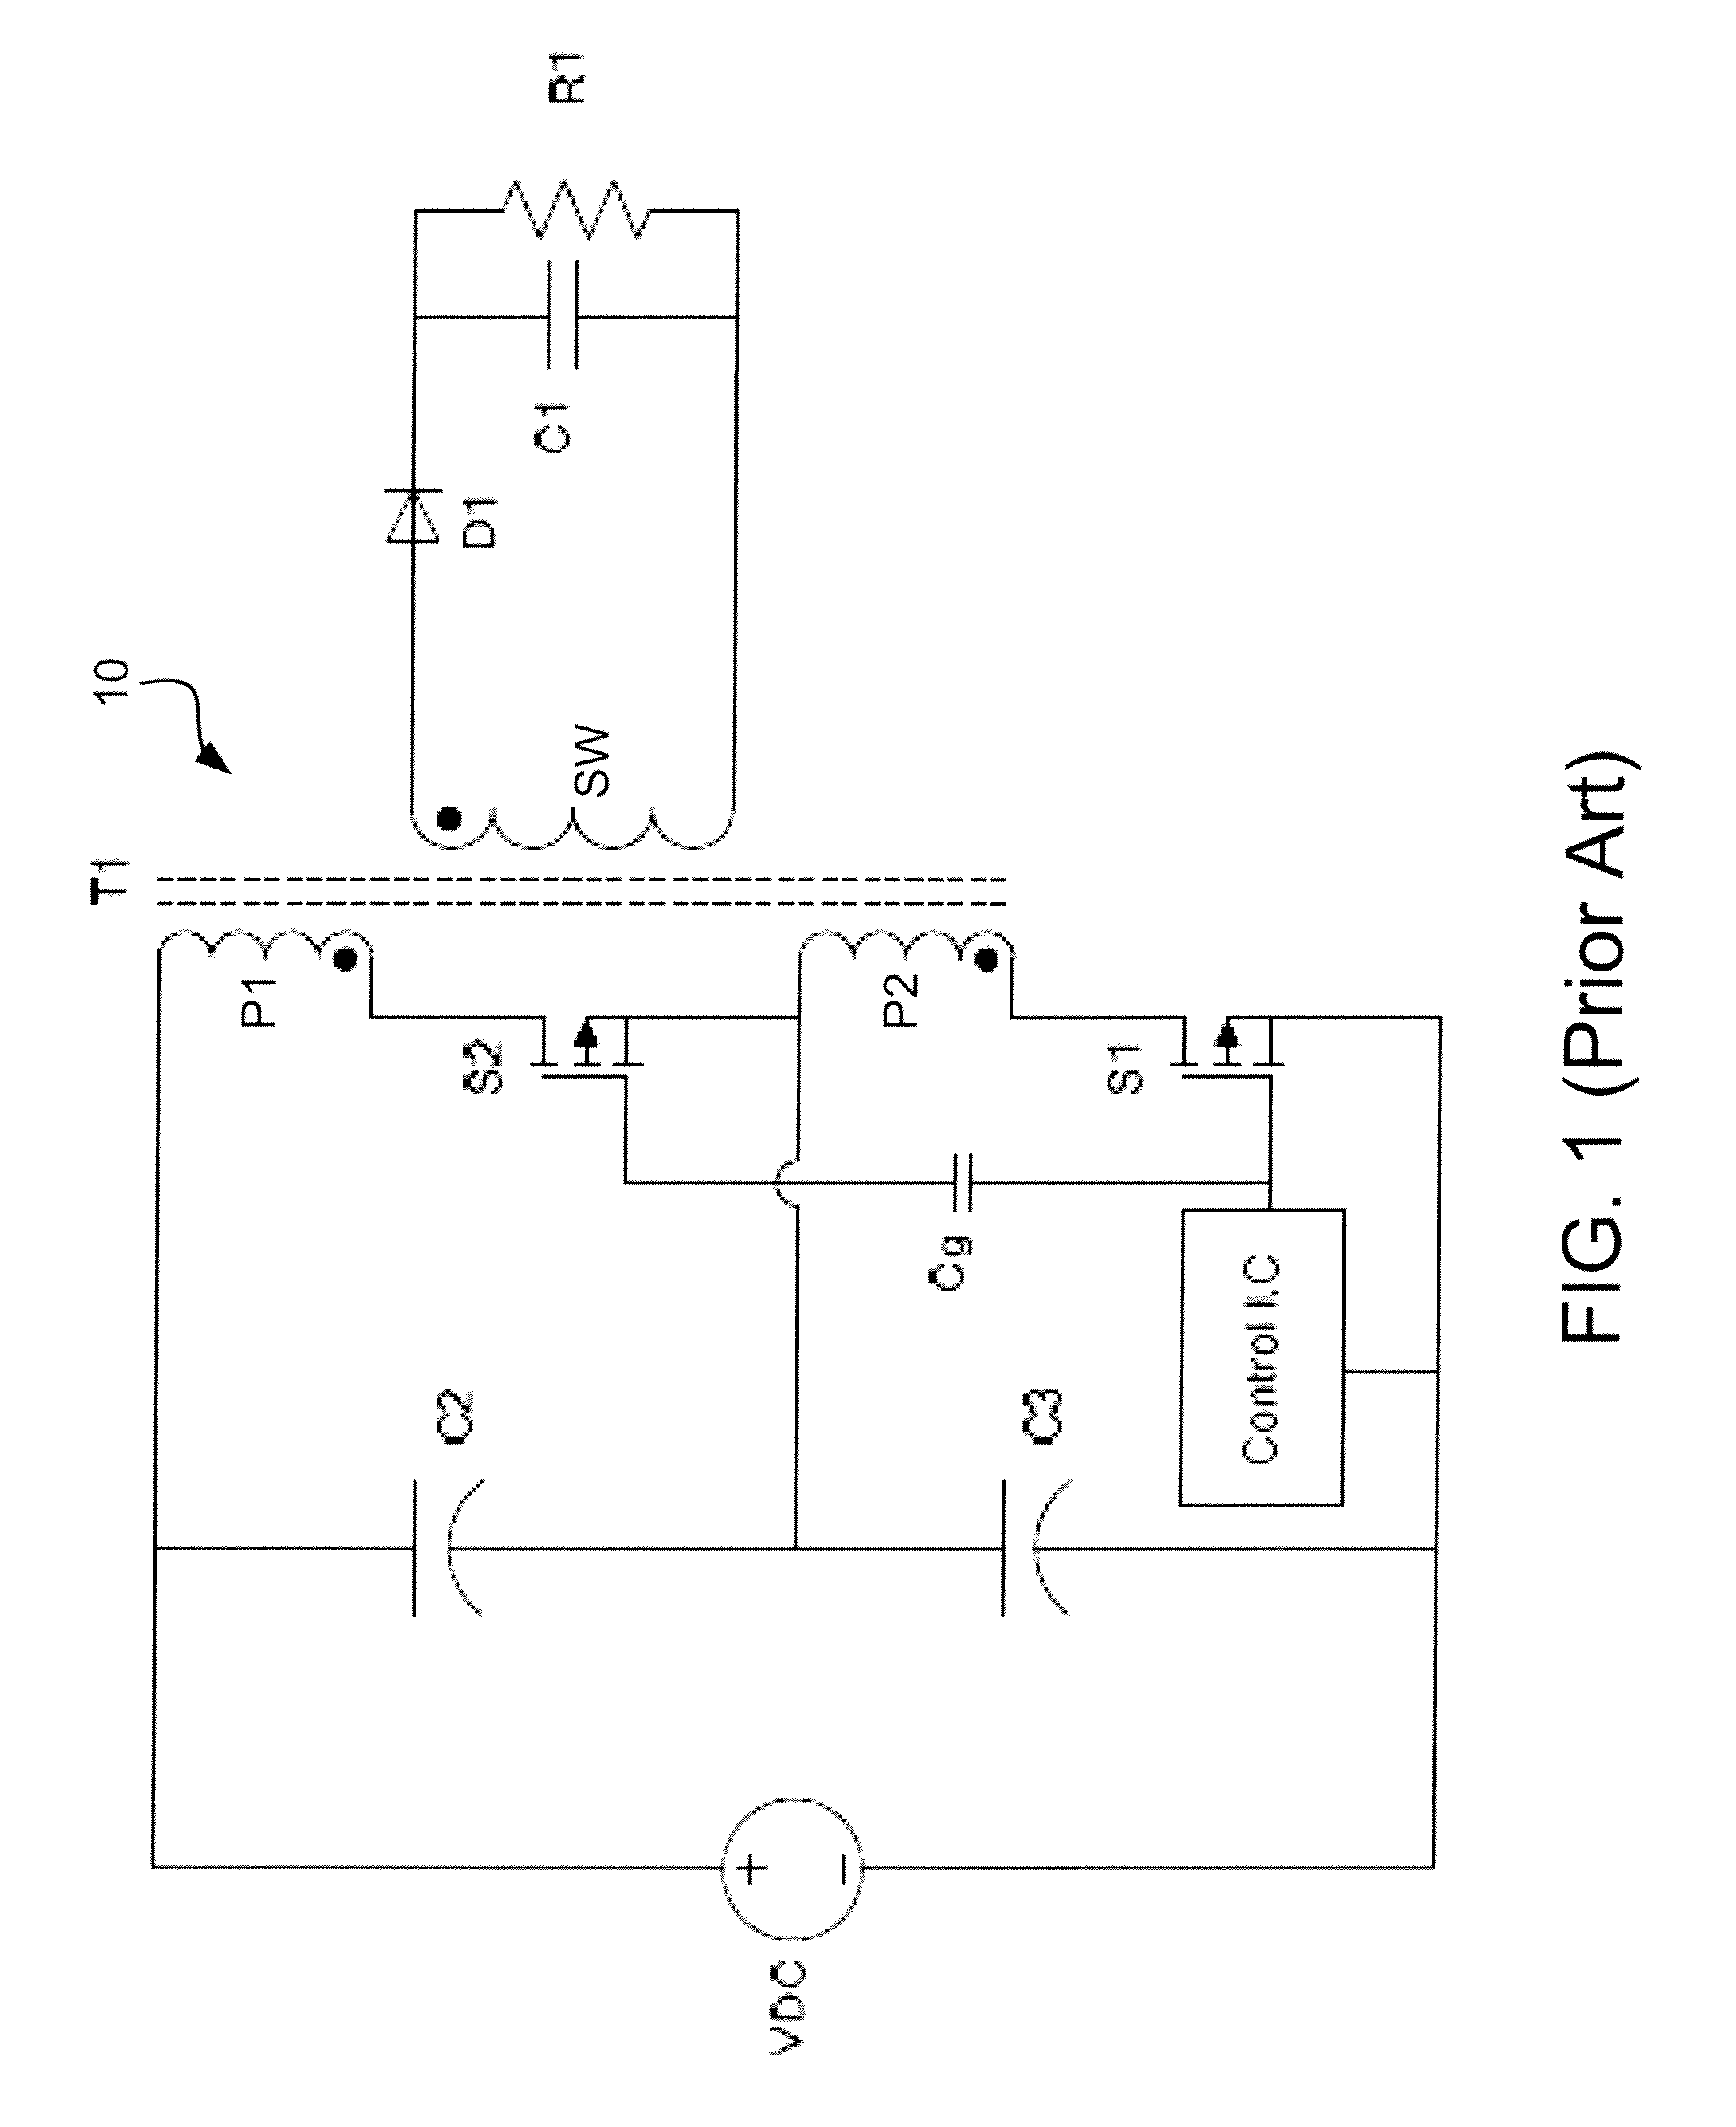 Stacked flyback converter with independent current loop control